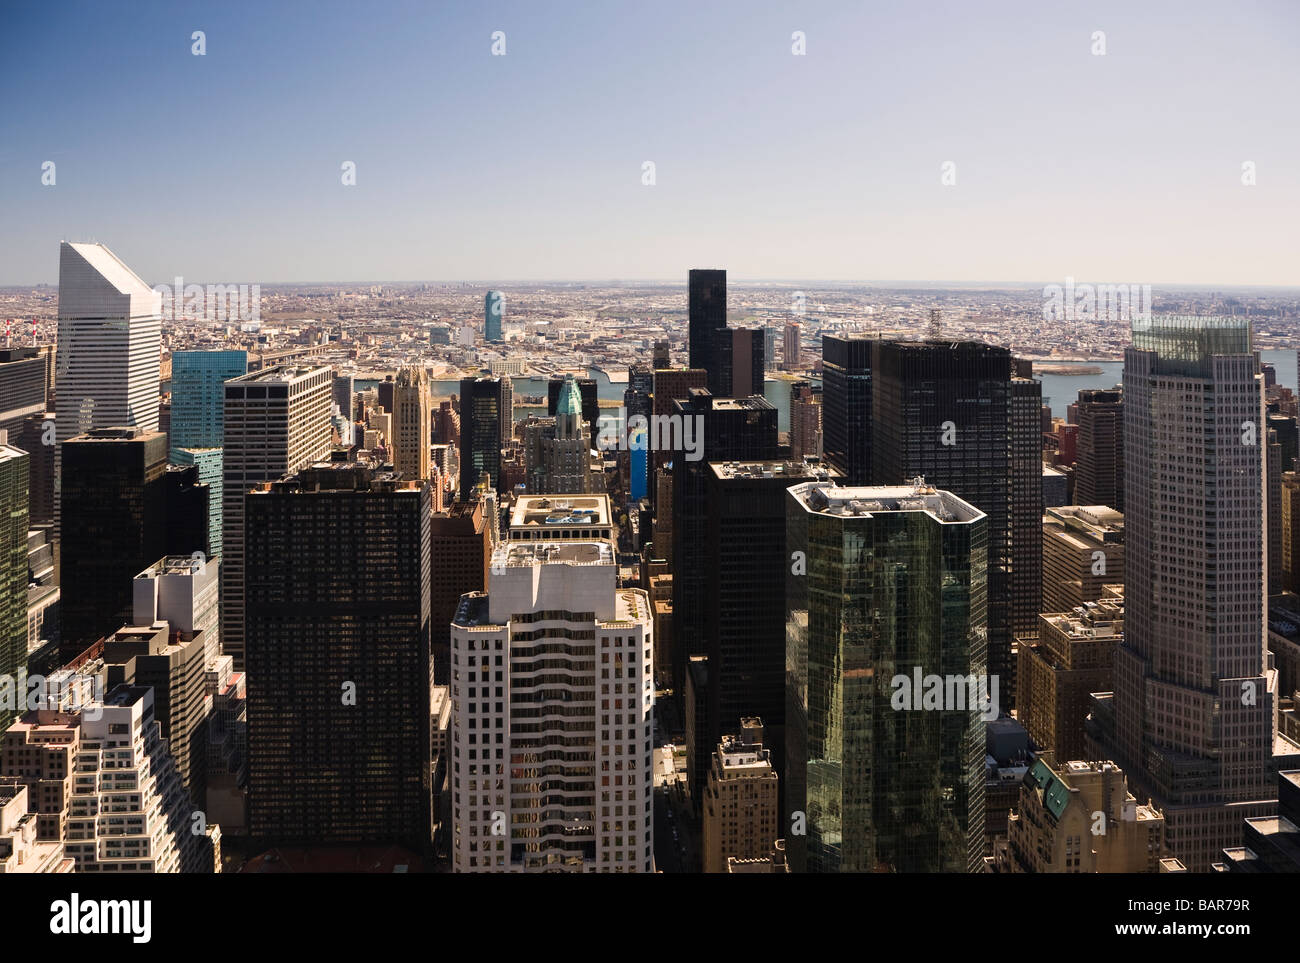 New York Skyline with a view east over Citigroup building Waldorf Astoria and the Bear Sterns offices Stock Photo